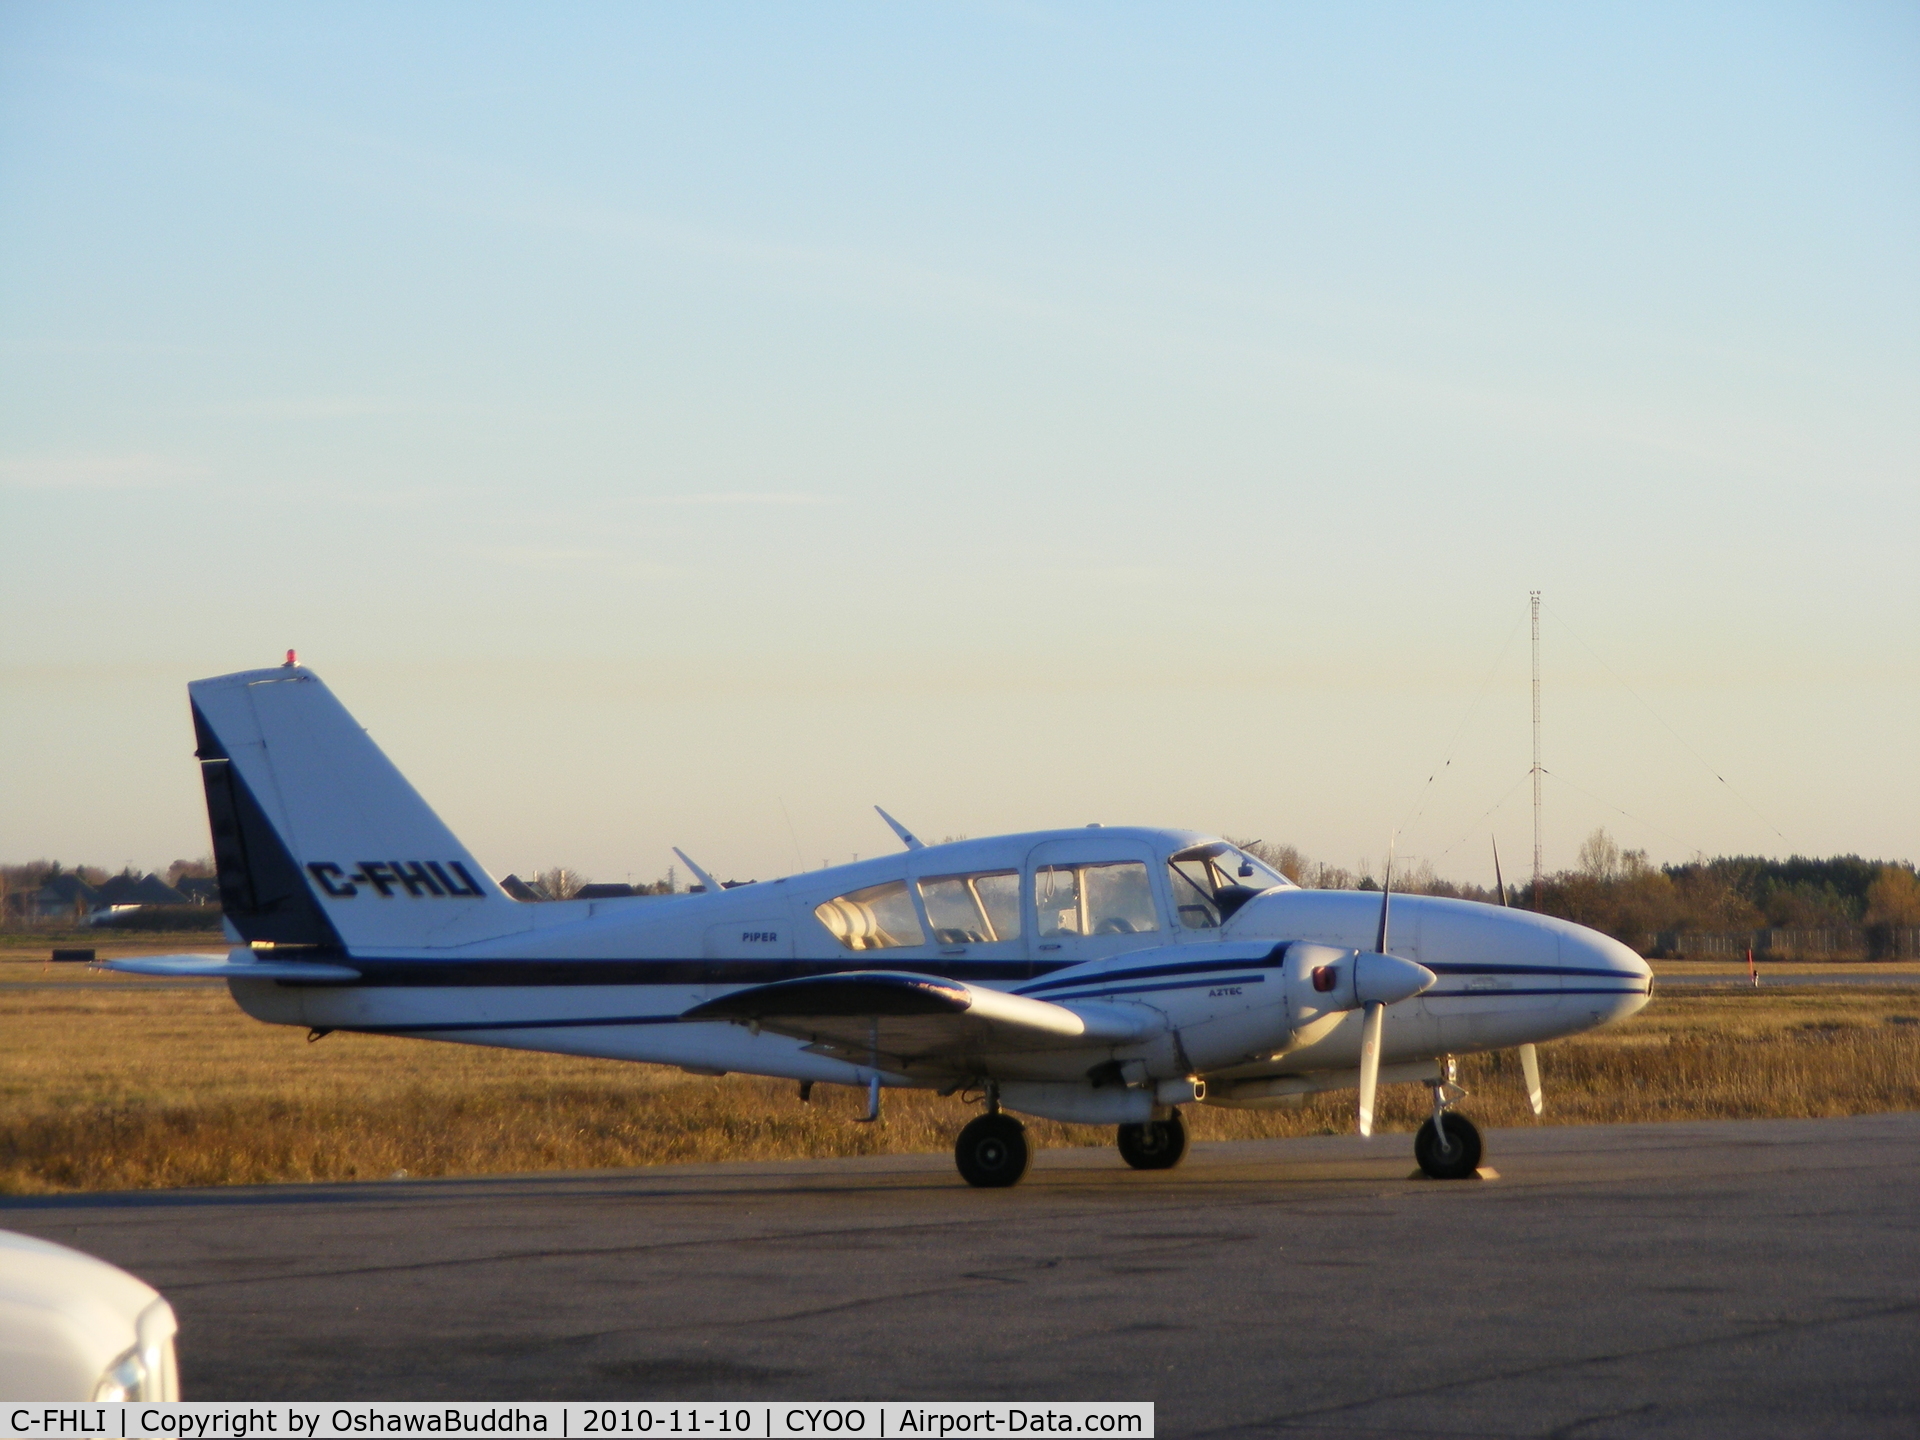 C-FHLI, 1965 Piper PA-23-250 C/N 27-2774, Basking in the sunset...